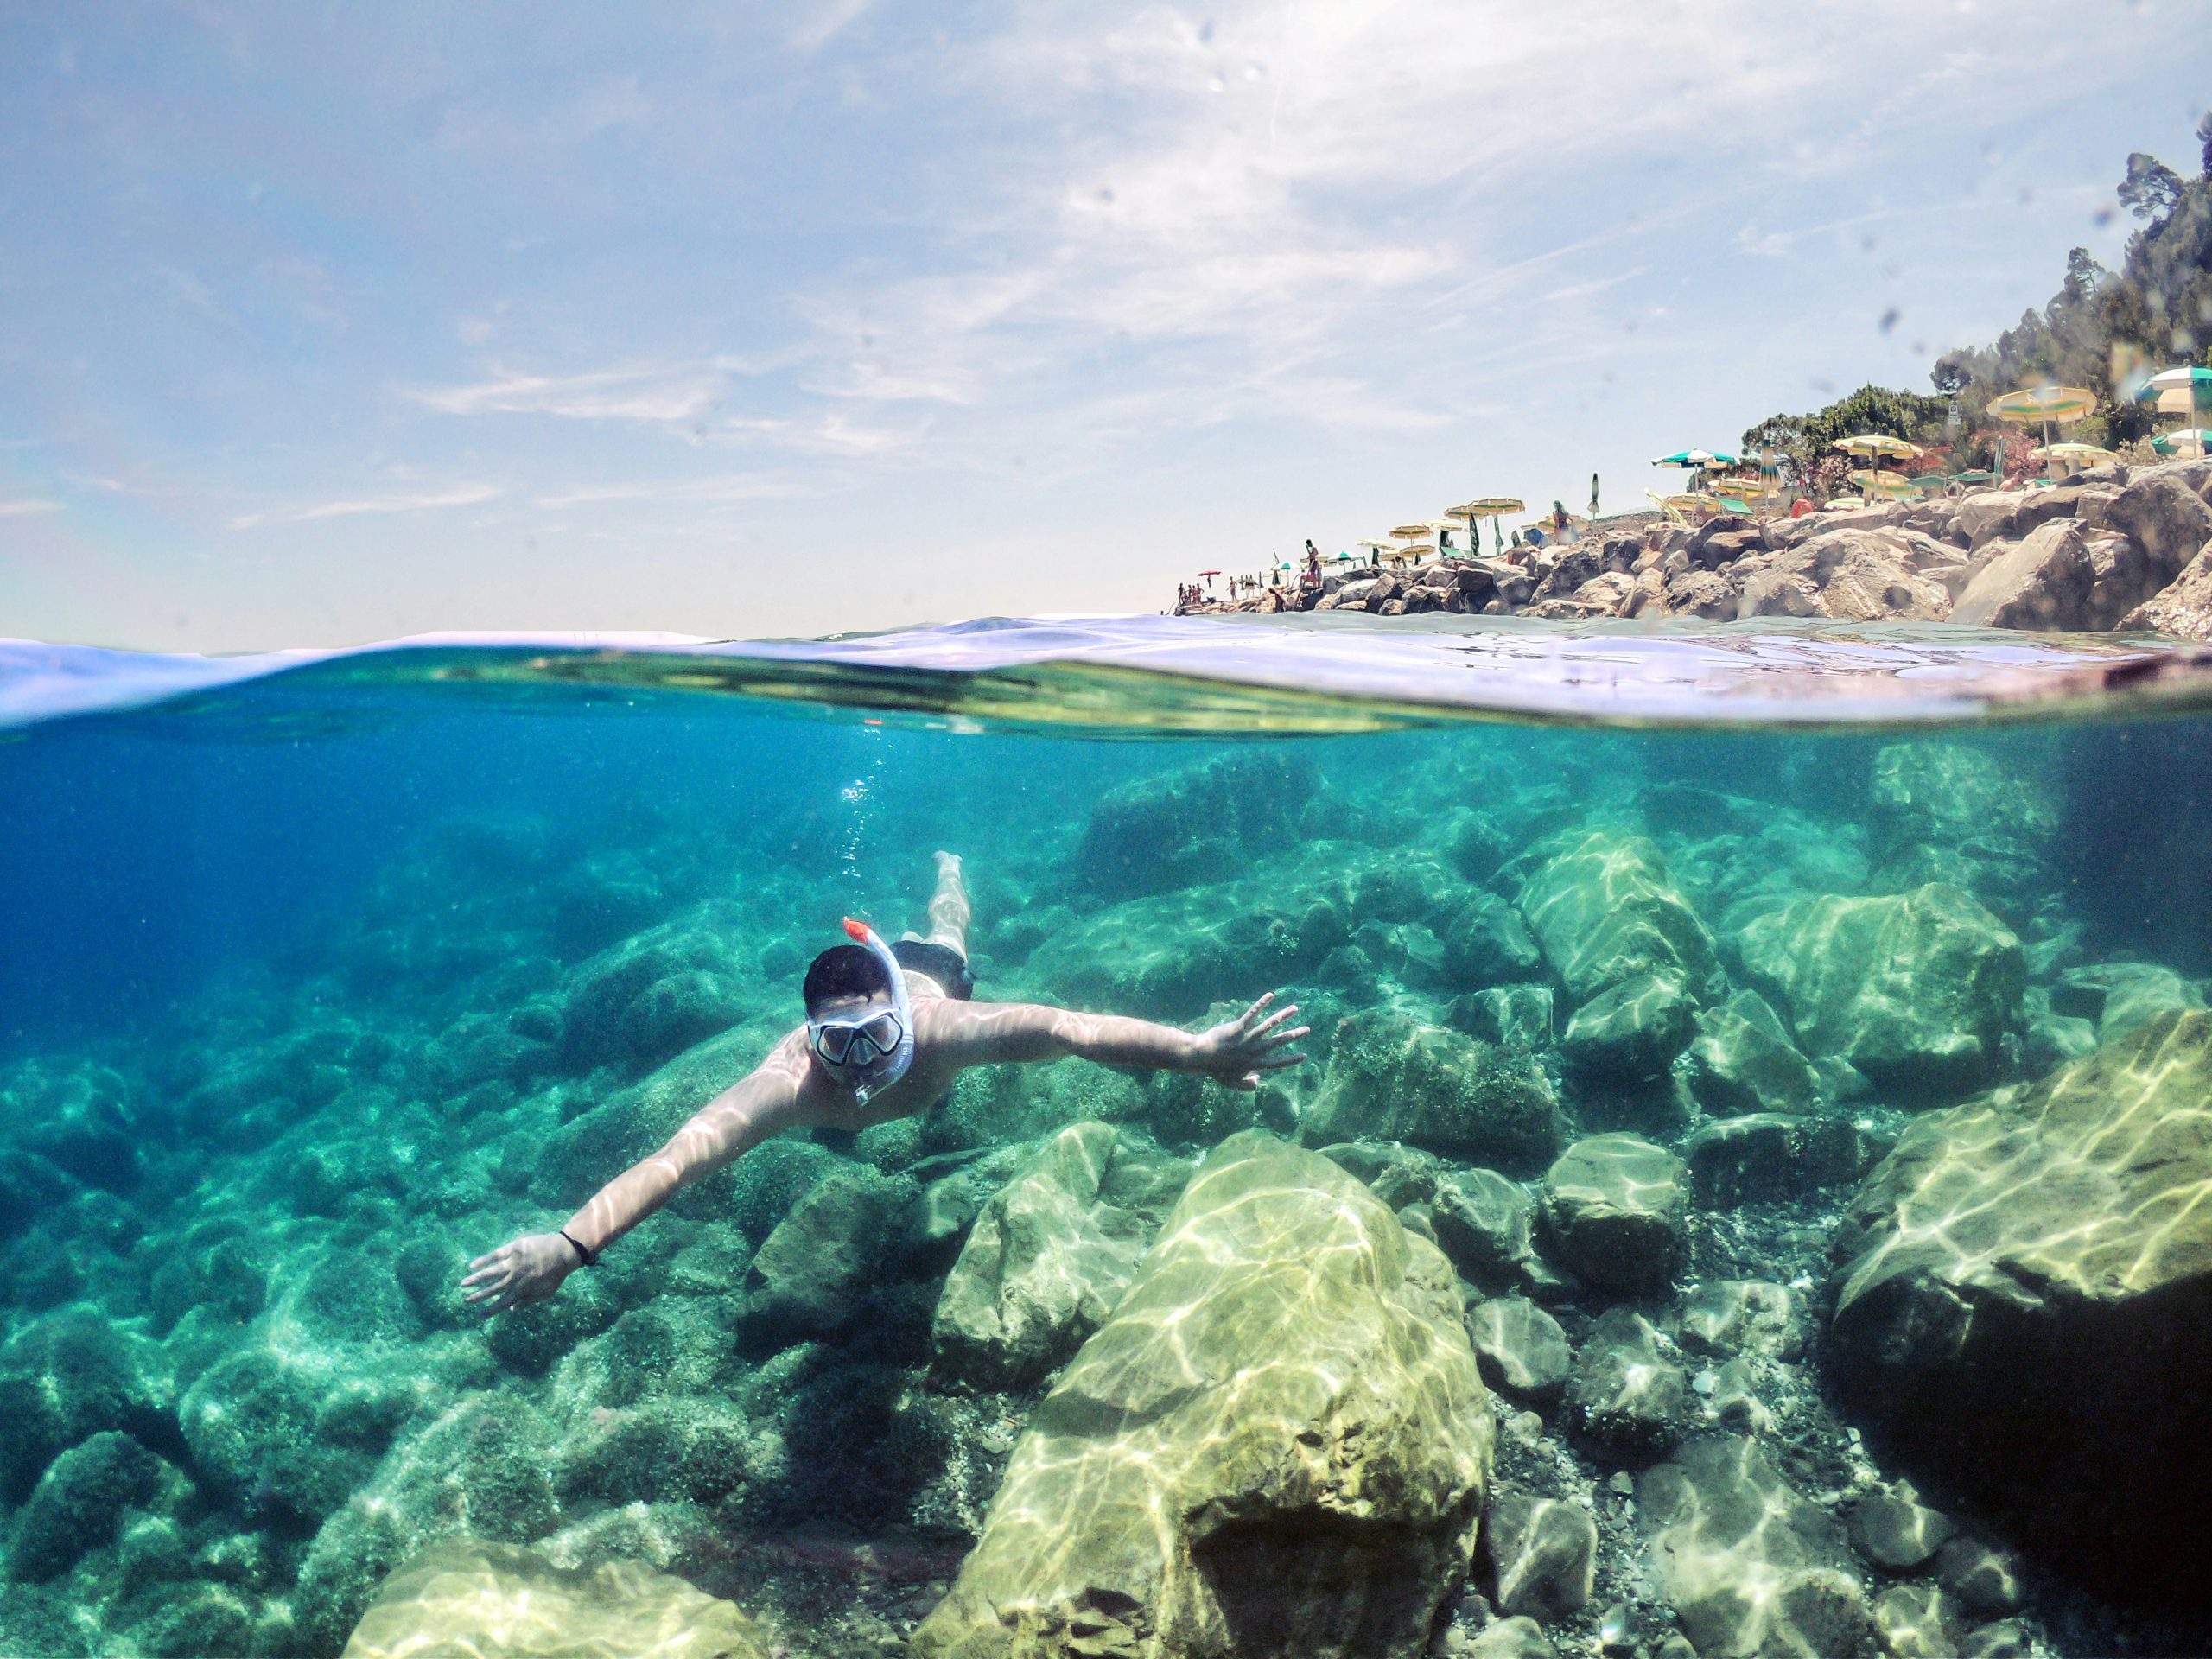 discover the best snorkeling spots with crystal-clear waters and vibrant marine life for an unforgettable underwater adventure.